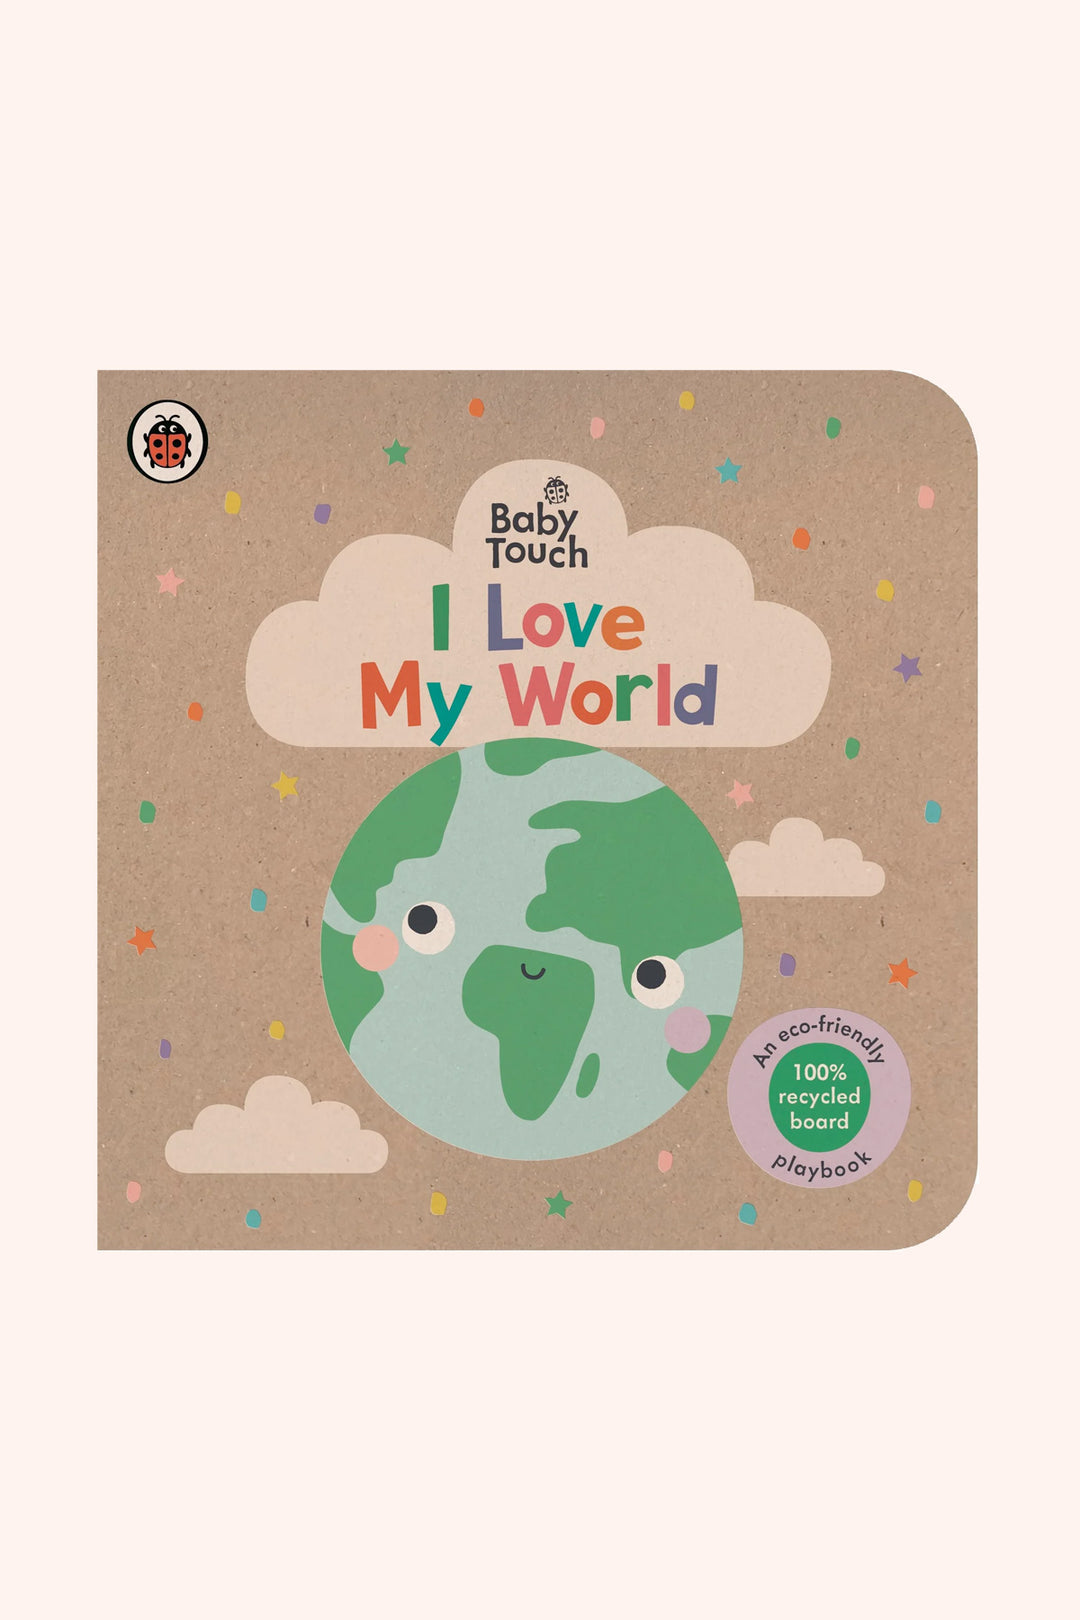 Baby Touch - I Love My World